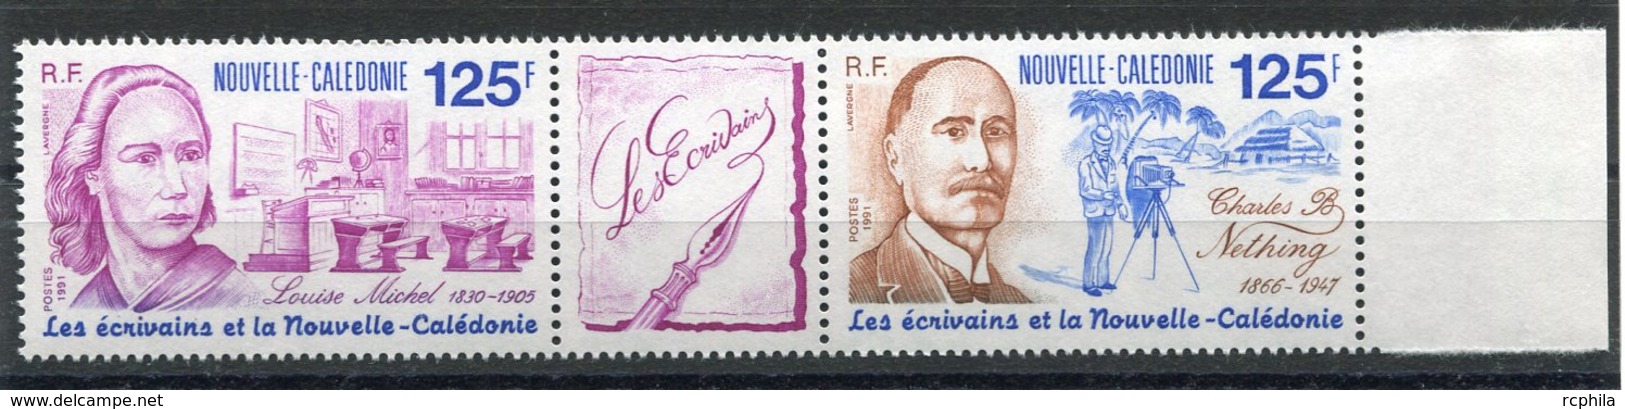 RC 10116 Nelle CALEDONIE N° 608A ECRIVAINS LOUISE MICHEL CHARLES B NETHING PHOTOGRAPHIE NEUF ** MNH - Ungebraucht